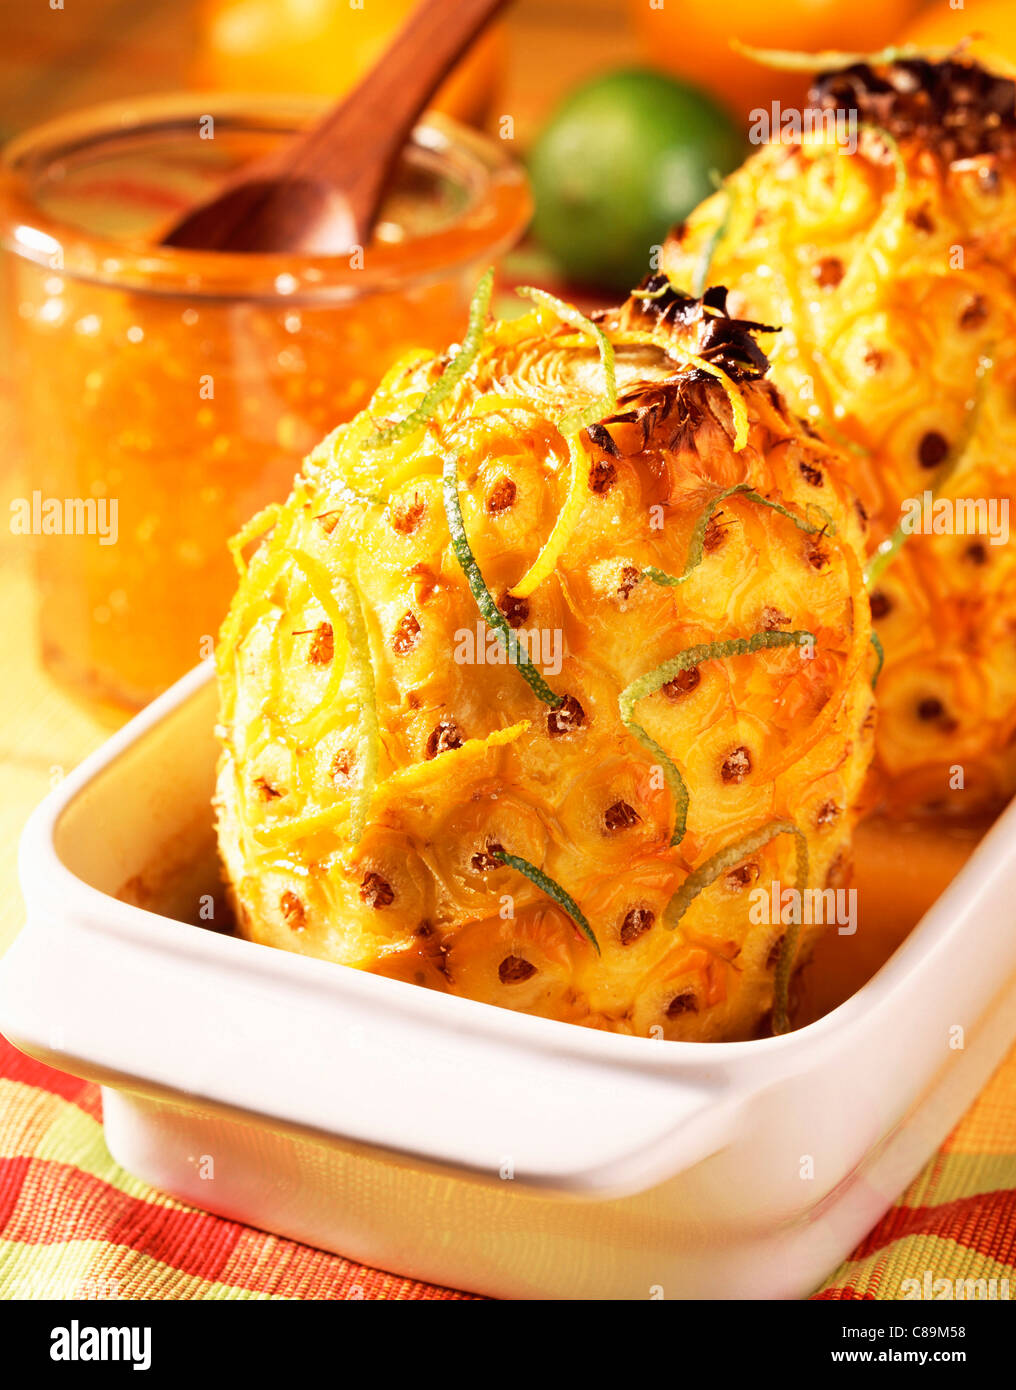 Baked preserved pineapple Stock Photo